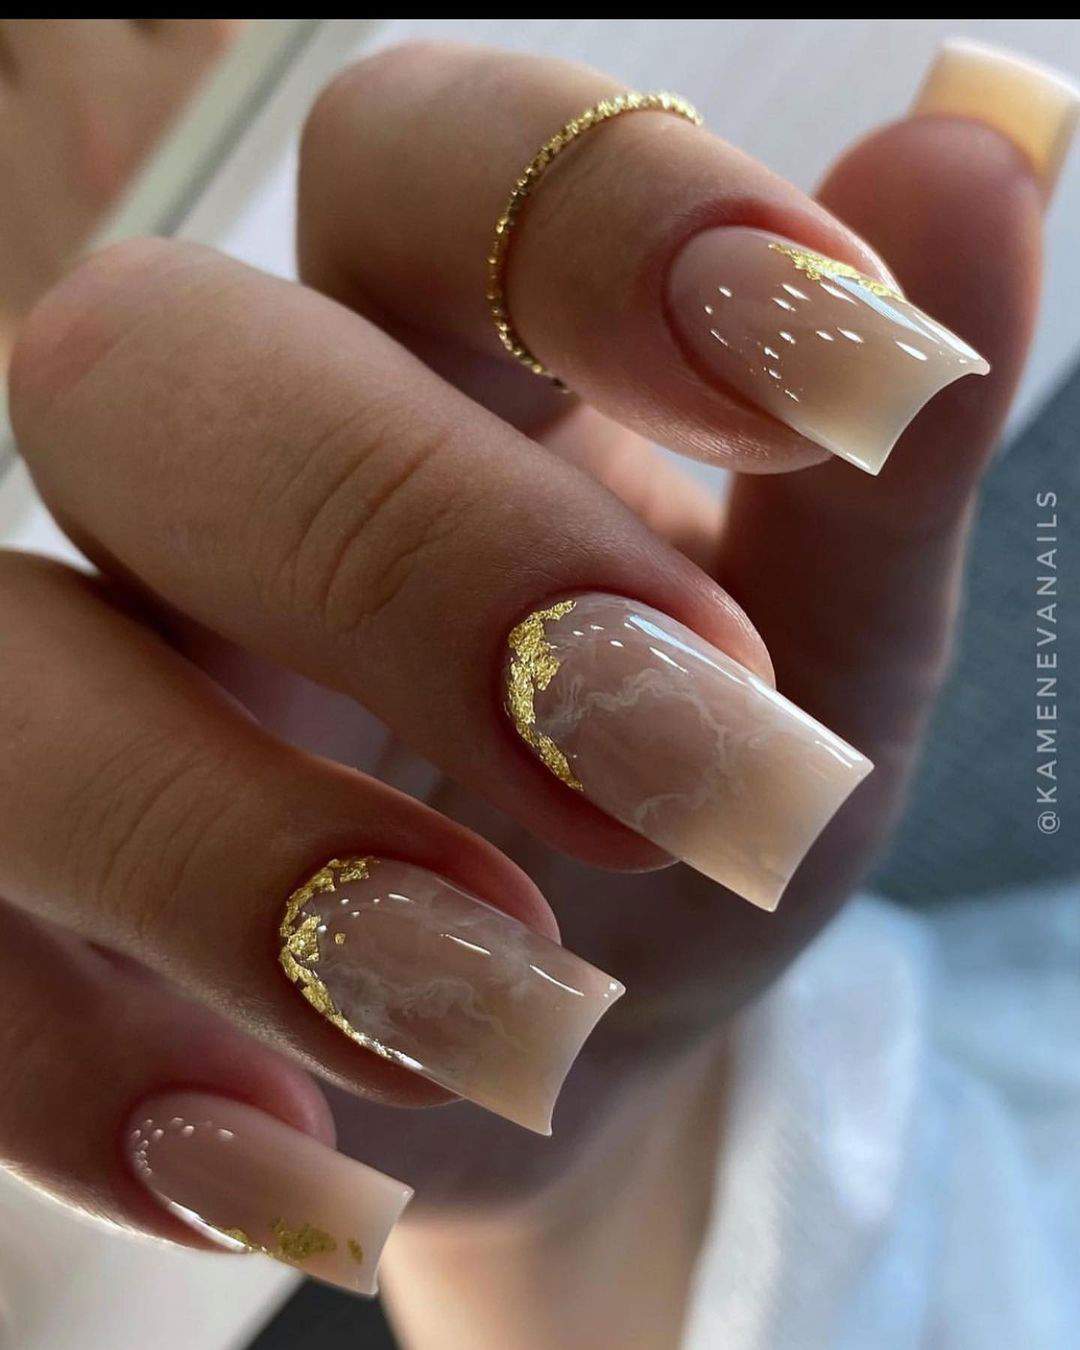 50 Best Nail Designs Trends To Try Out In 2022 images 32